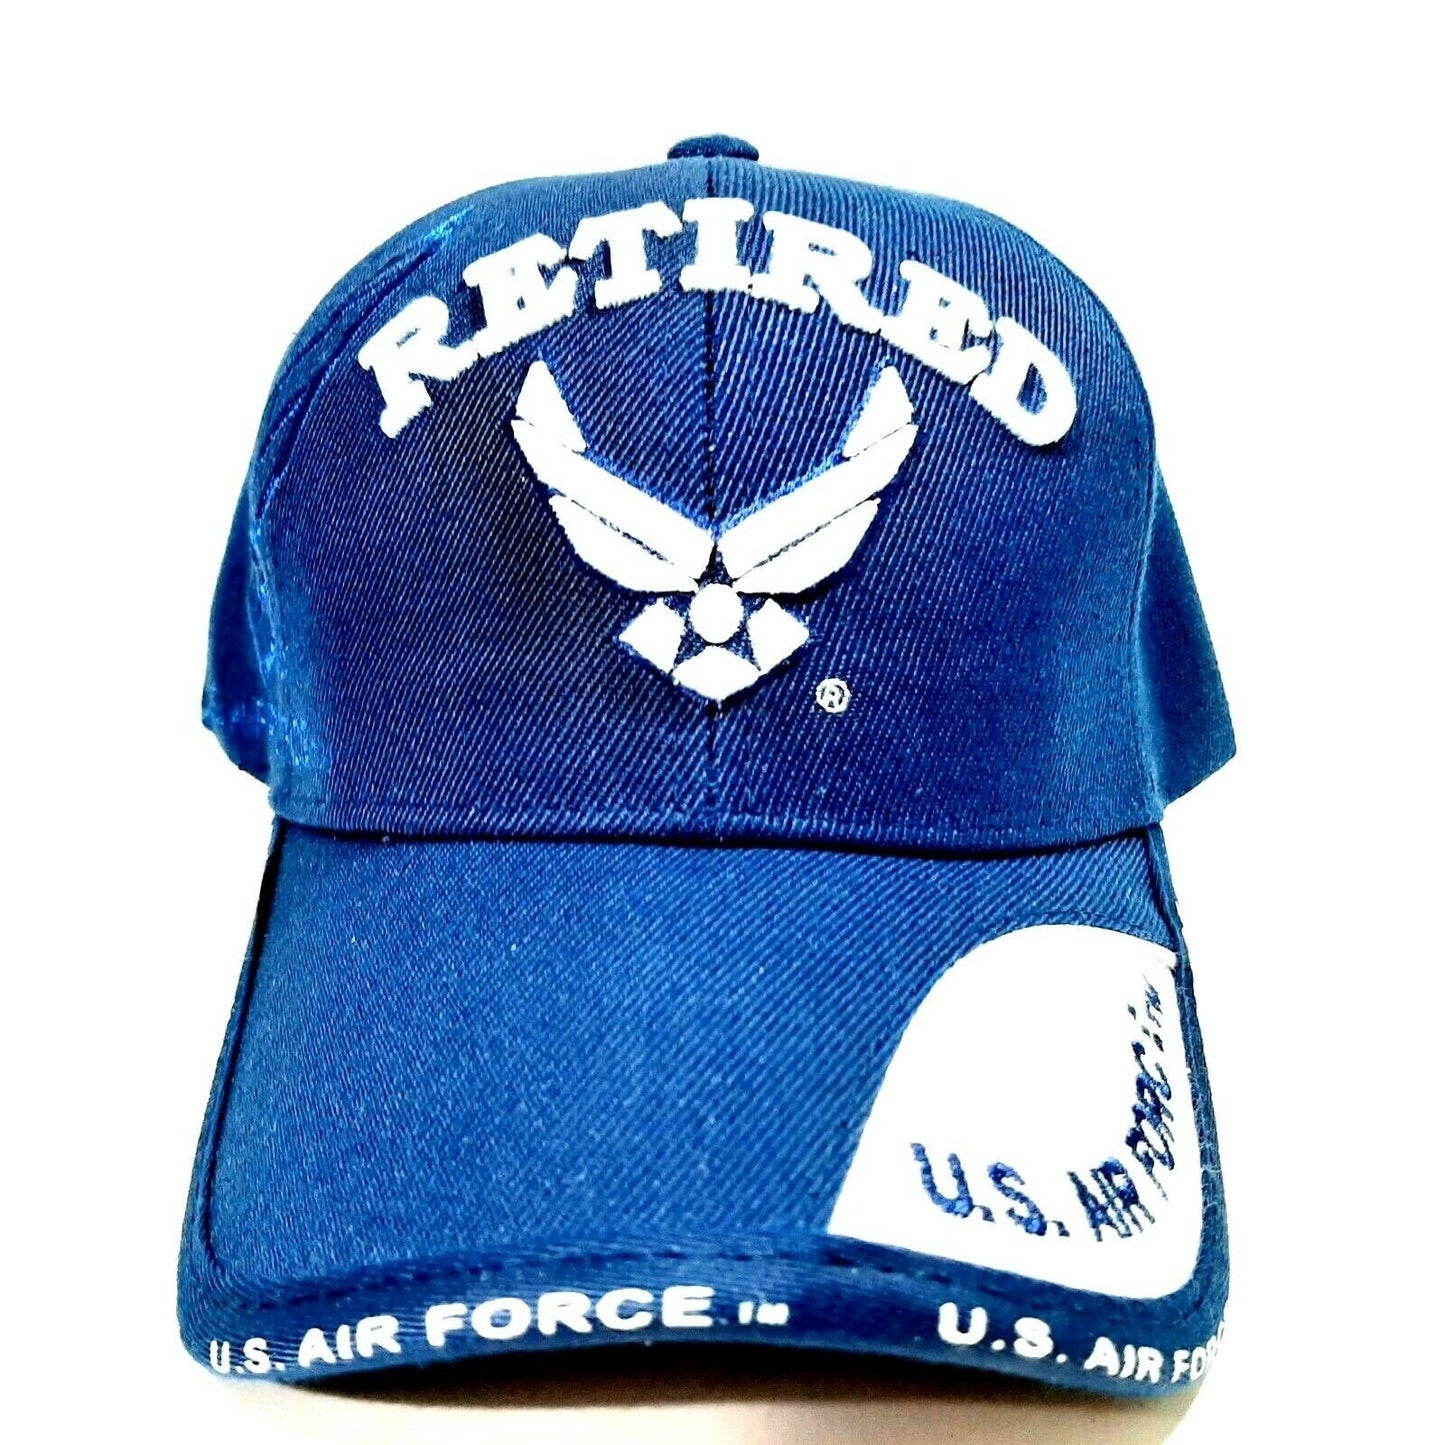 US Air Force Retired Men's Ball Cap Hat Navy Blue Acrylic Embroidered